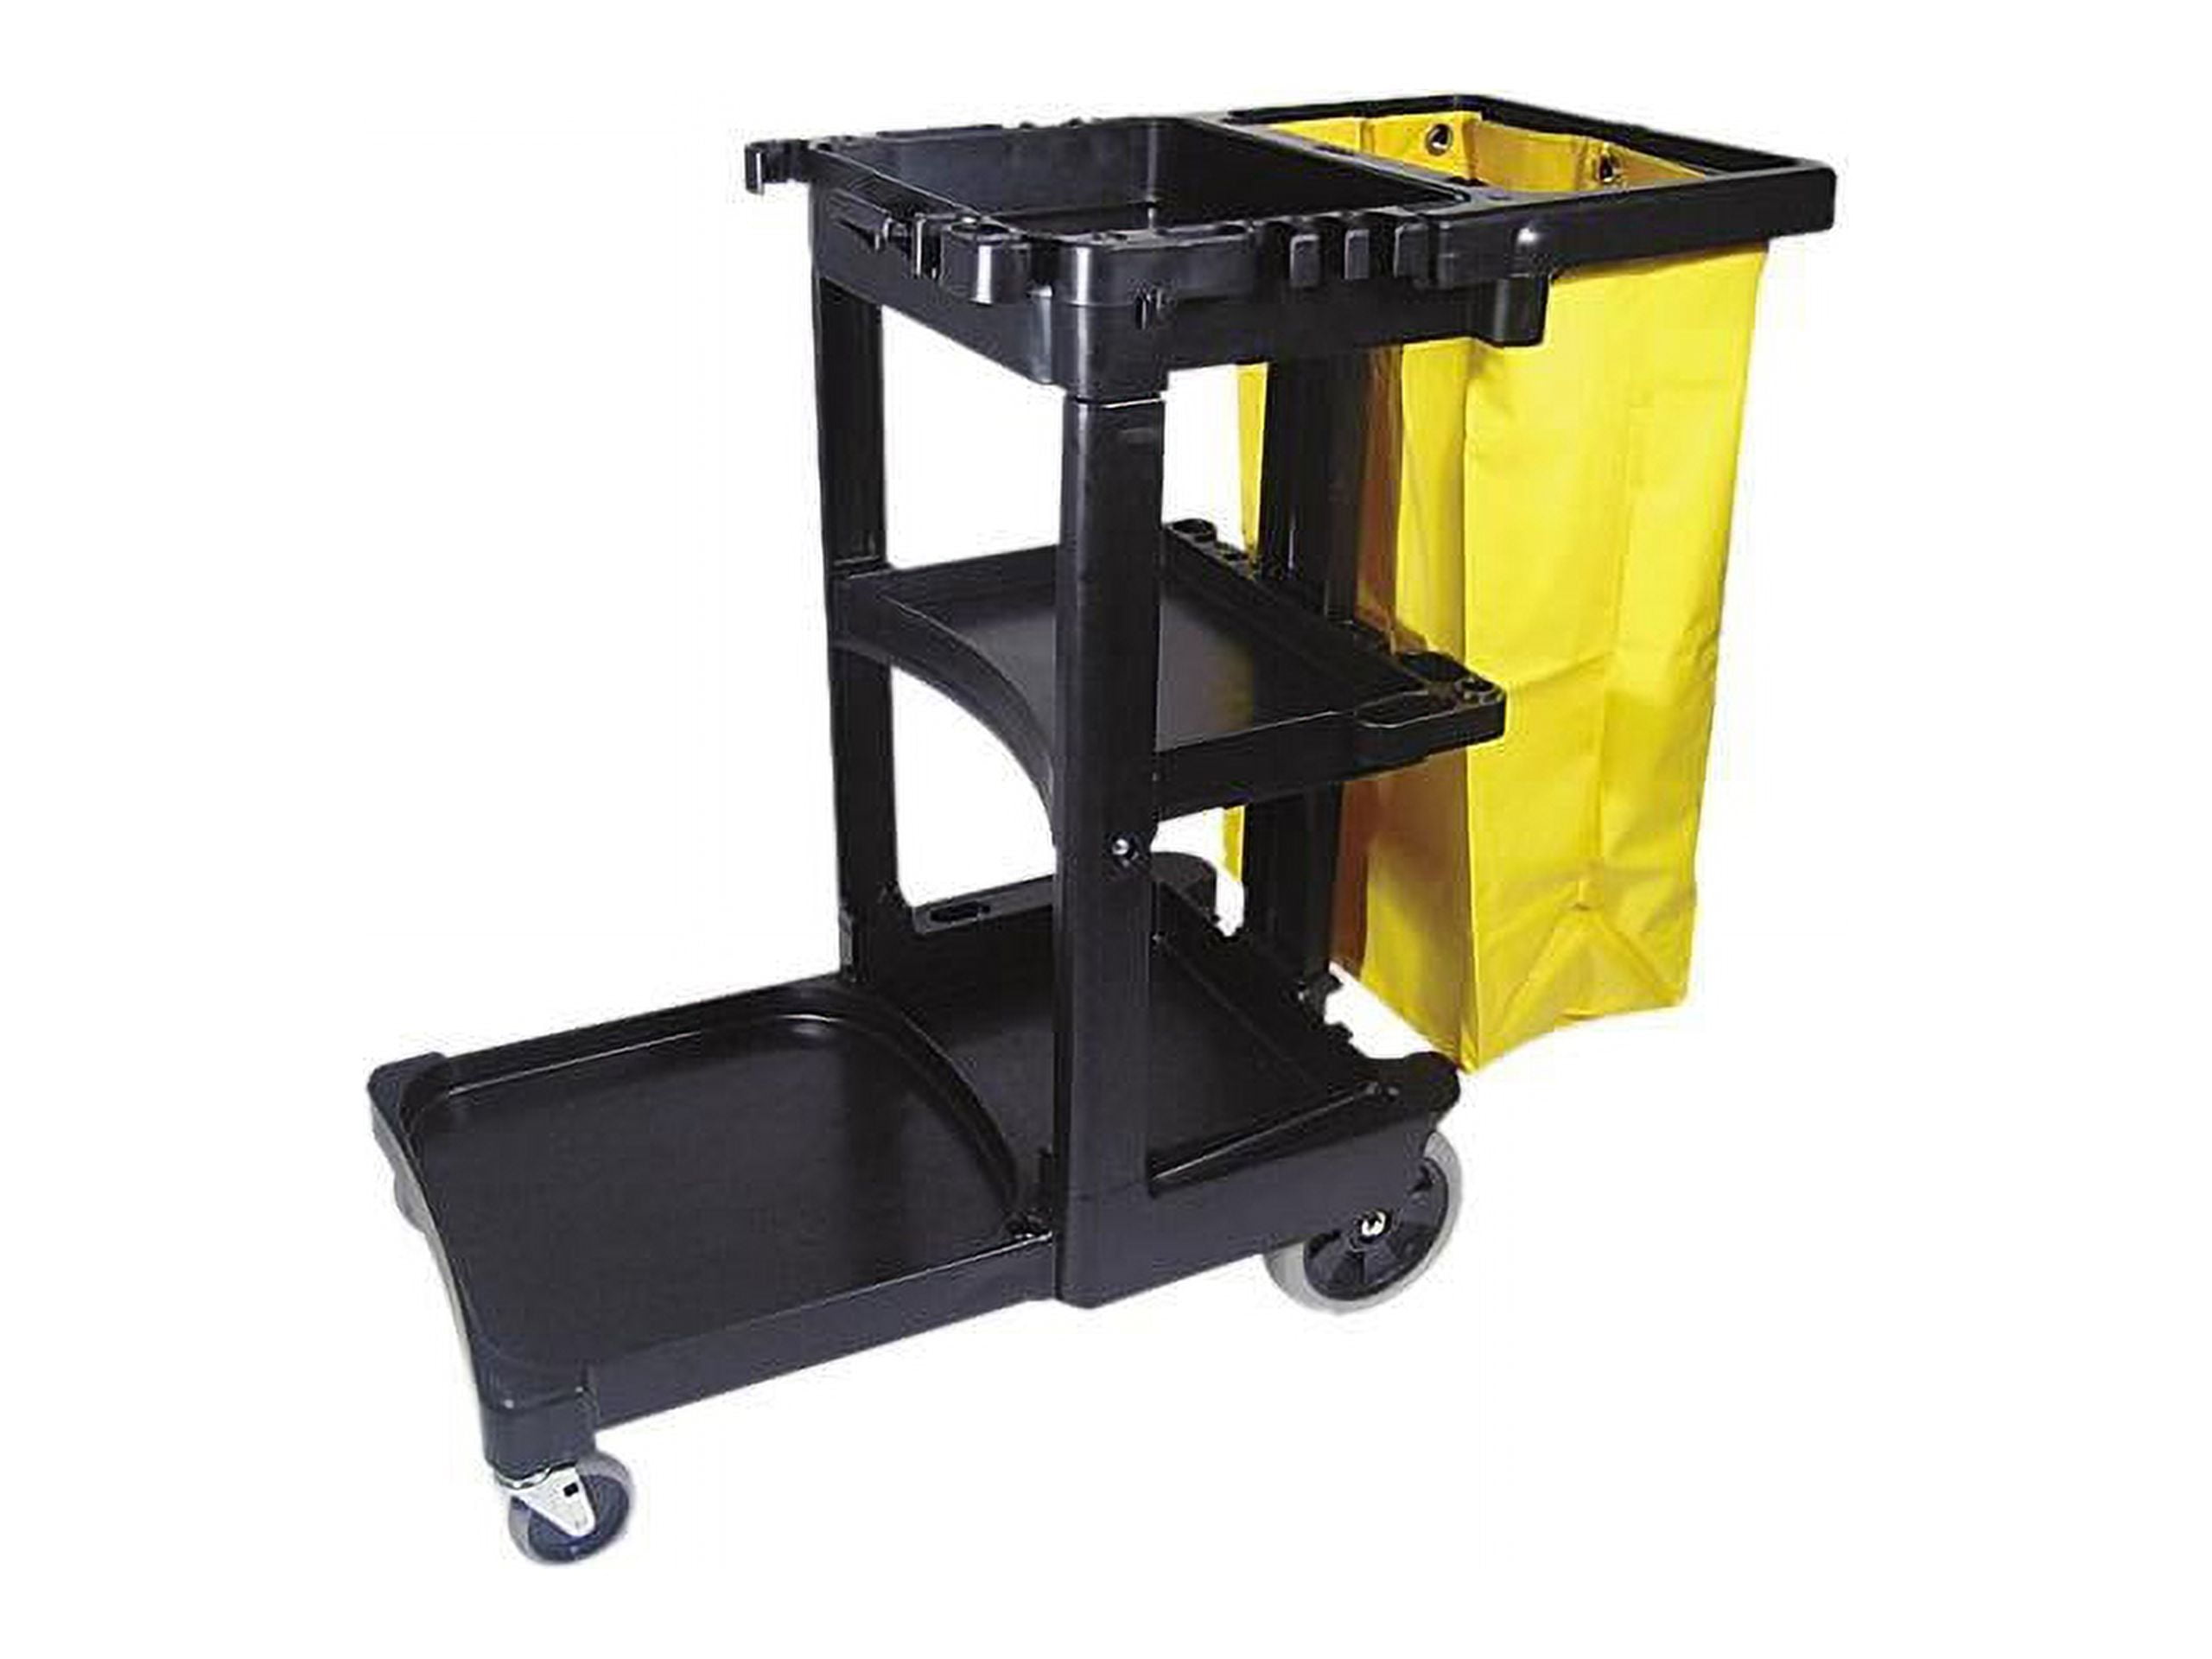 Rubbermaid Commercial Products Housekeeping Service Cart with Two Caddies,  Black 38. x 21 x 49, Utility/Service Rolling Cart with Wheels for